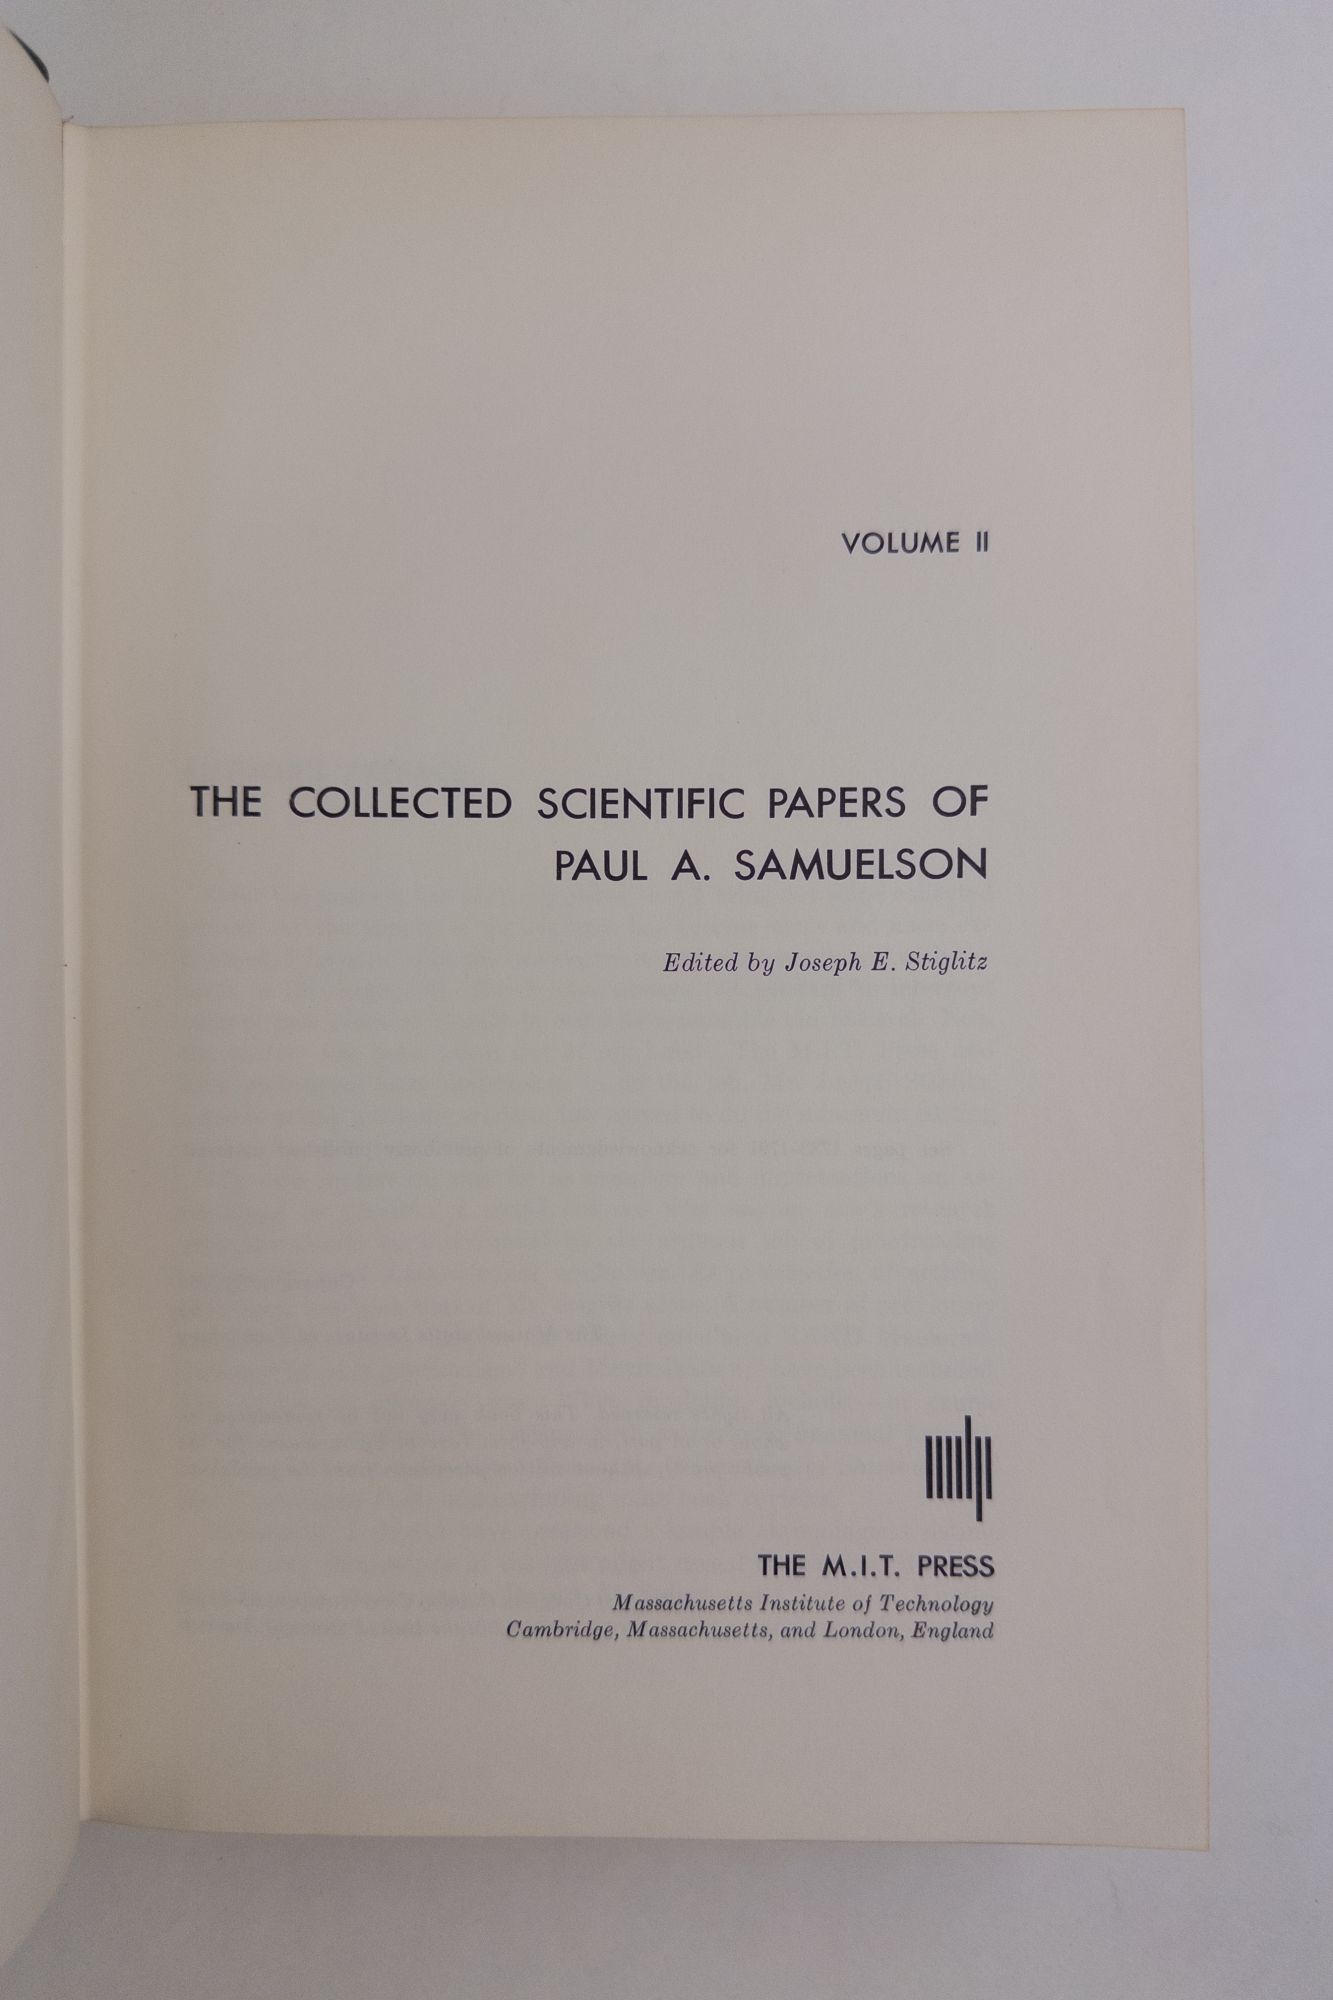 THE COLLECTED SCIENTIFIC PAPERS OF PAUL A. SAMUELSON [Volumes One and ...